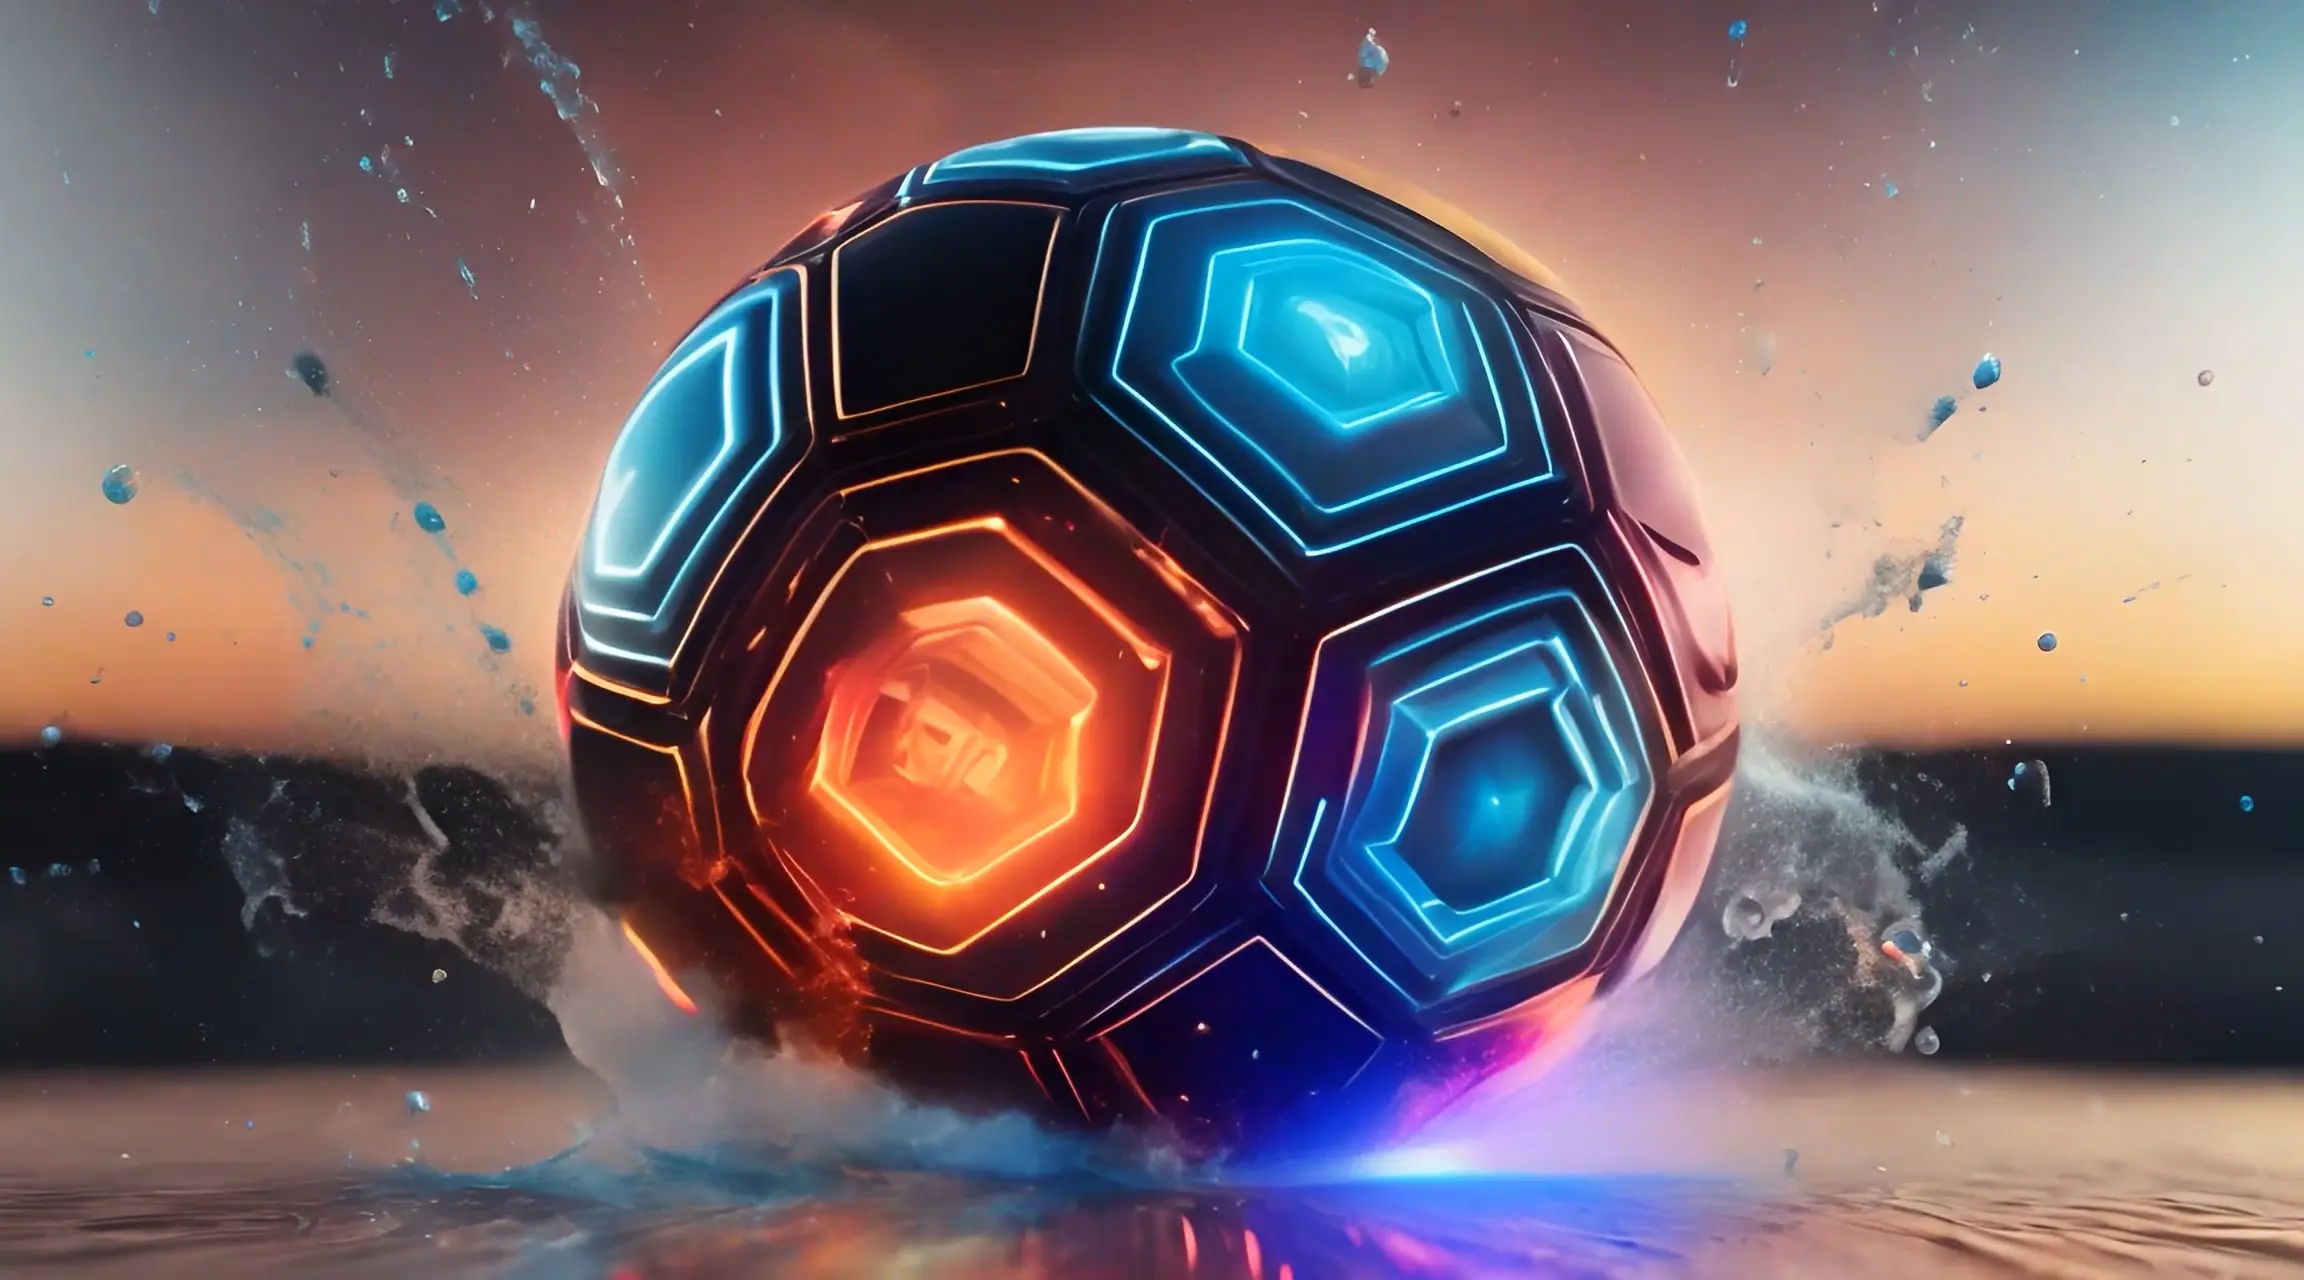 Digital Soccer Sphere Abstract Sports Backdrop